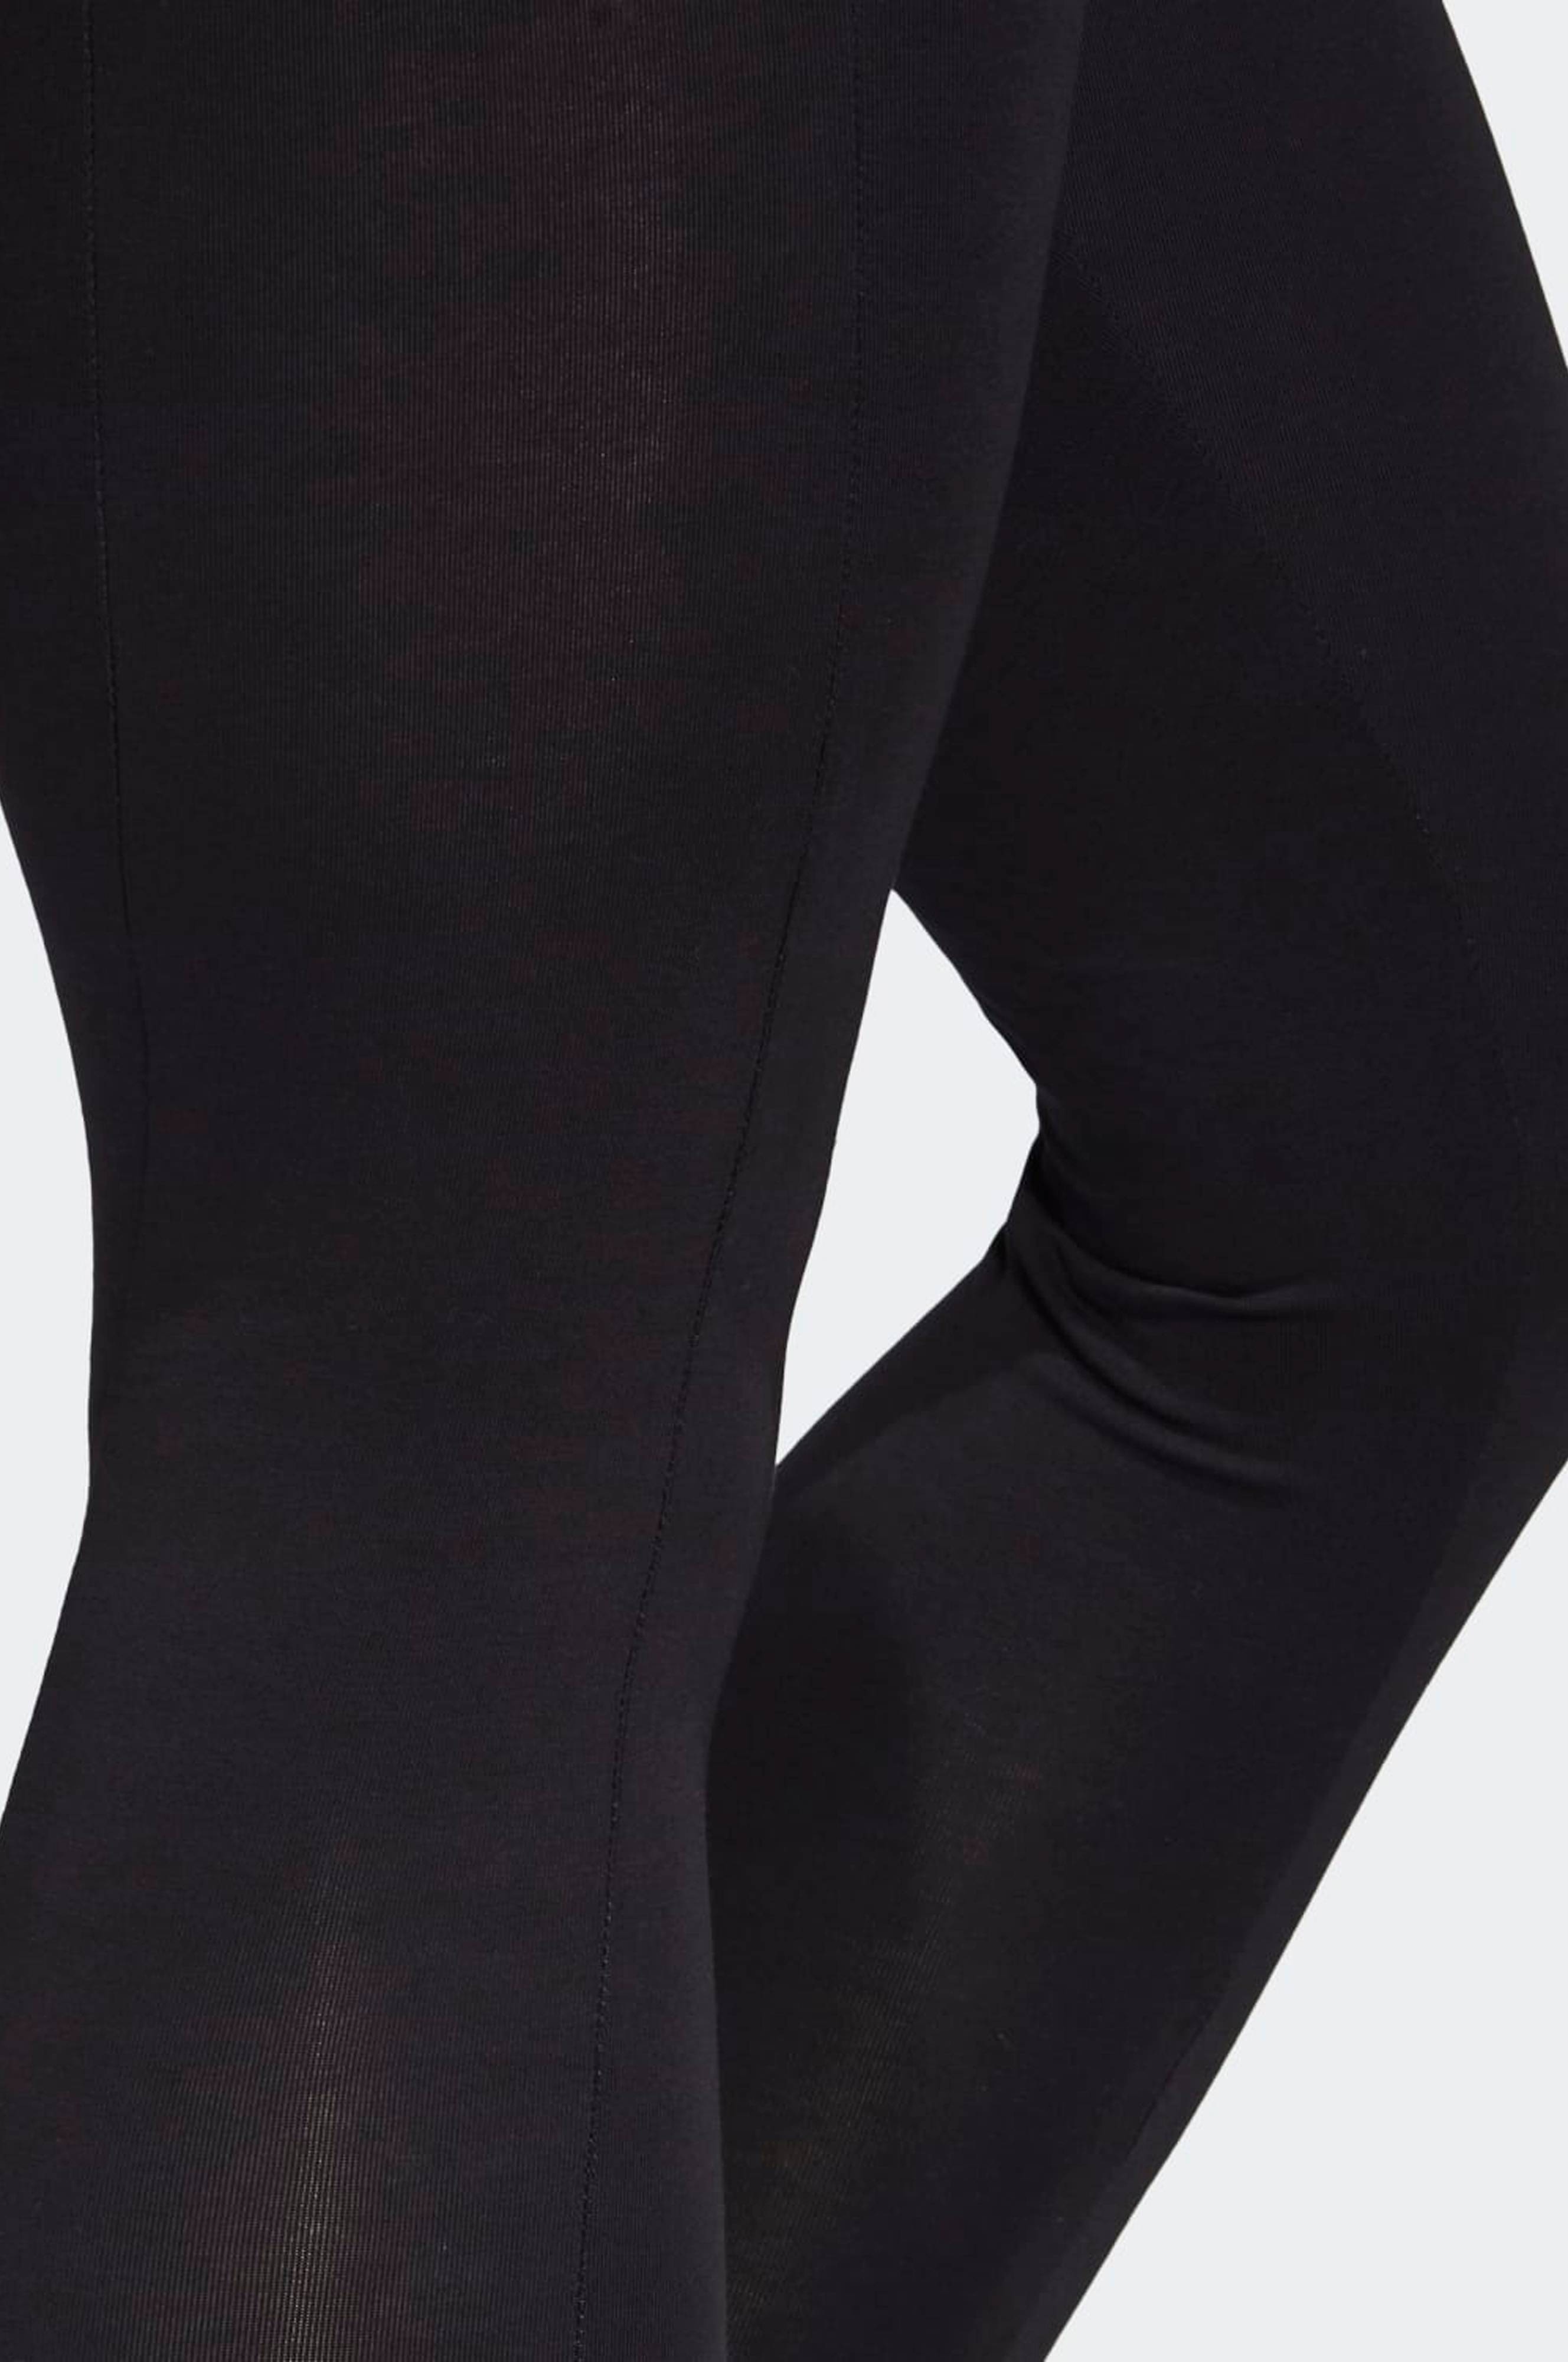 Adidas Women Must Have Stacked Logo Tights